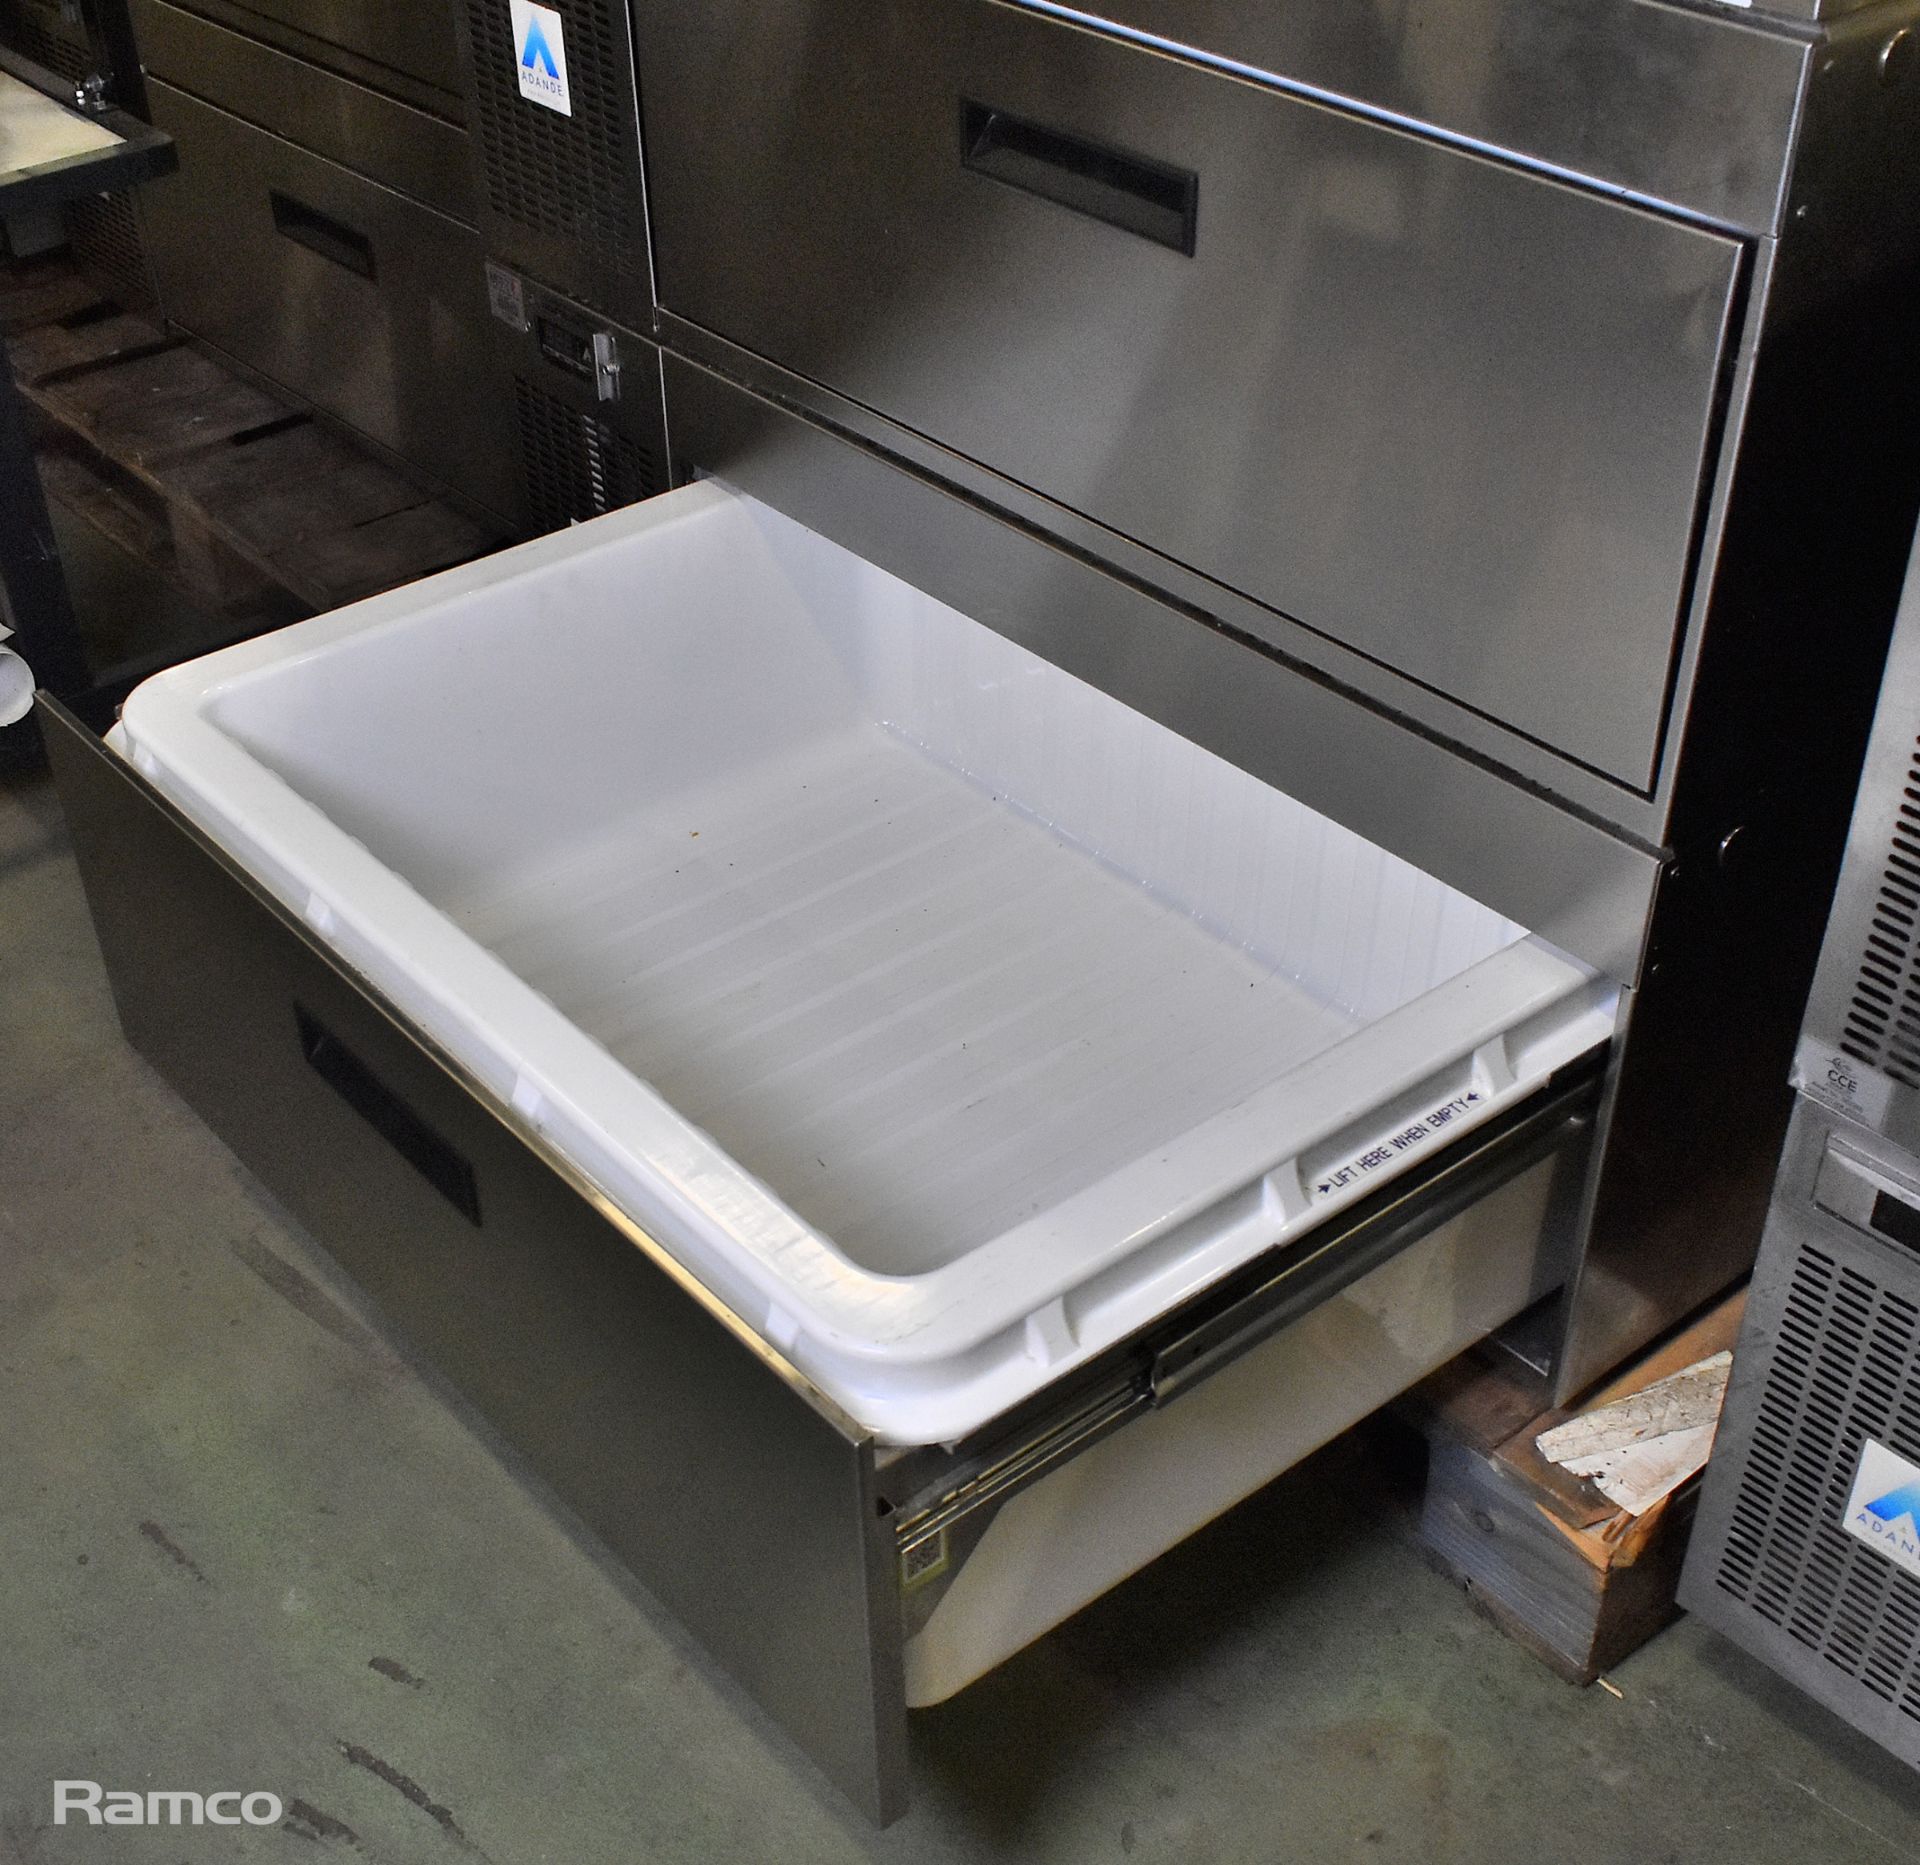 Adande stainless steel double drawer counter fridge - 240V - L110 x W70 x H92cm - Image 2 of 4